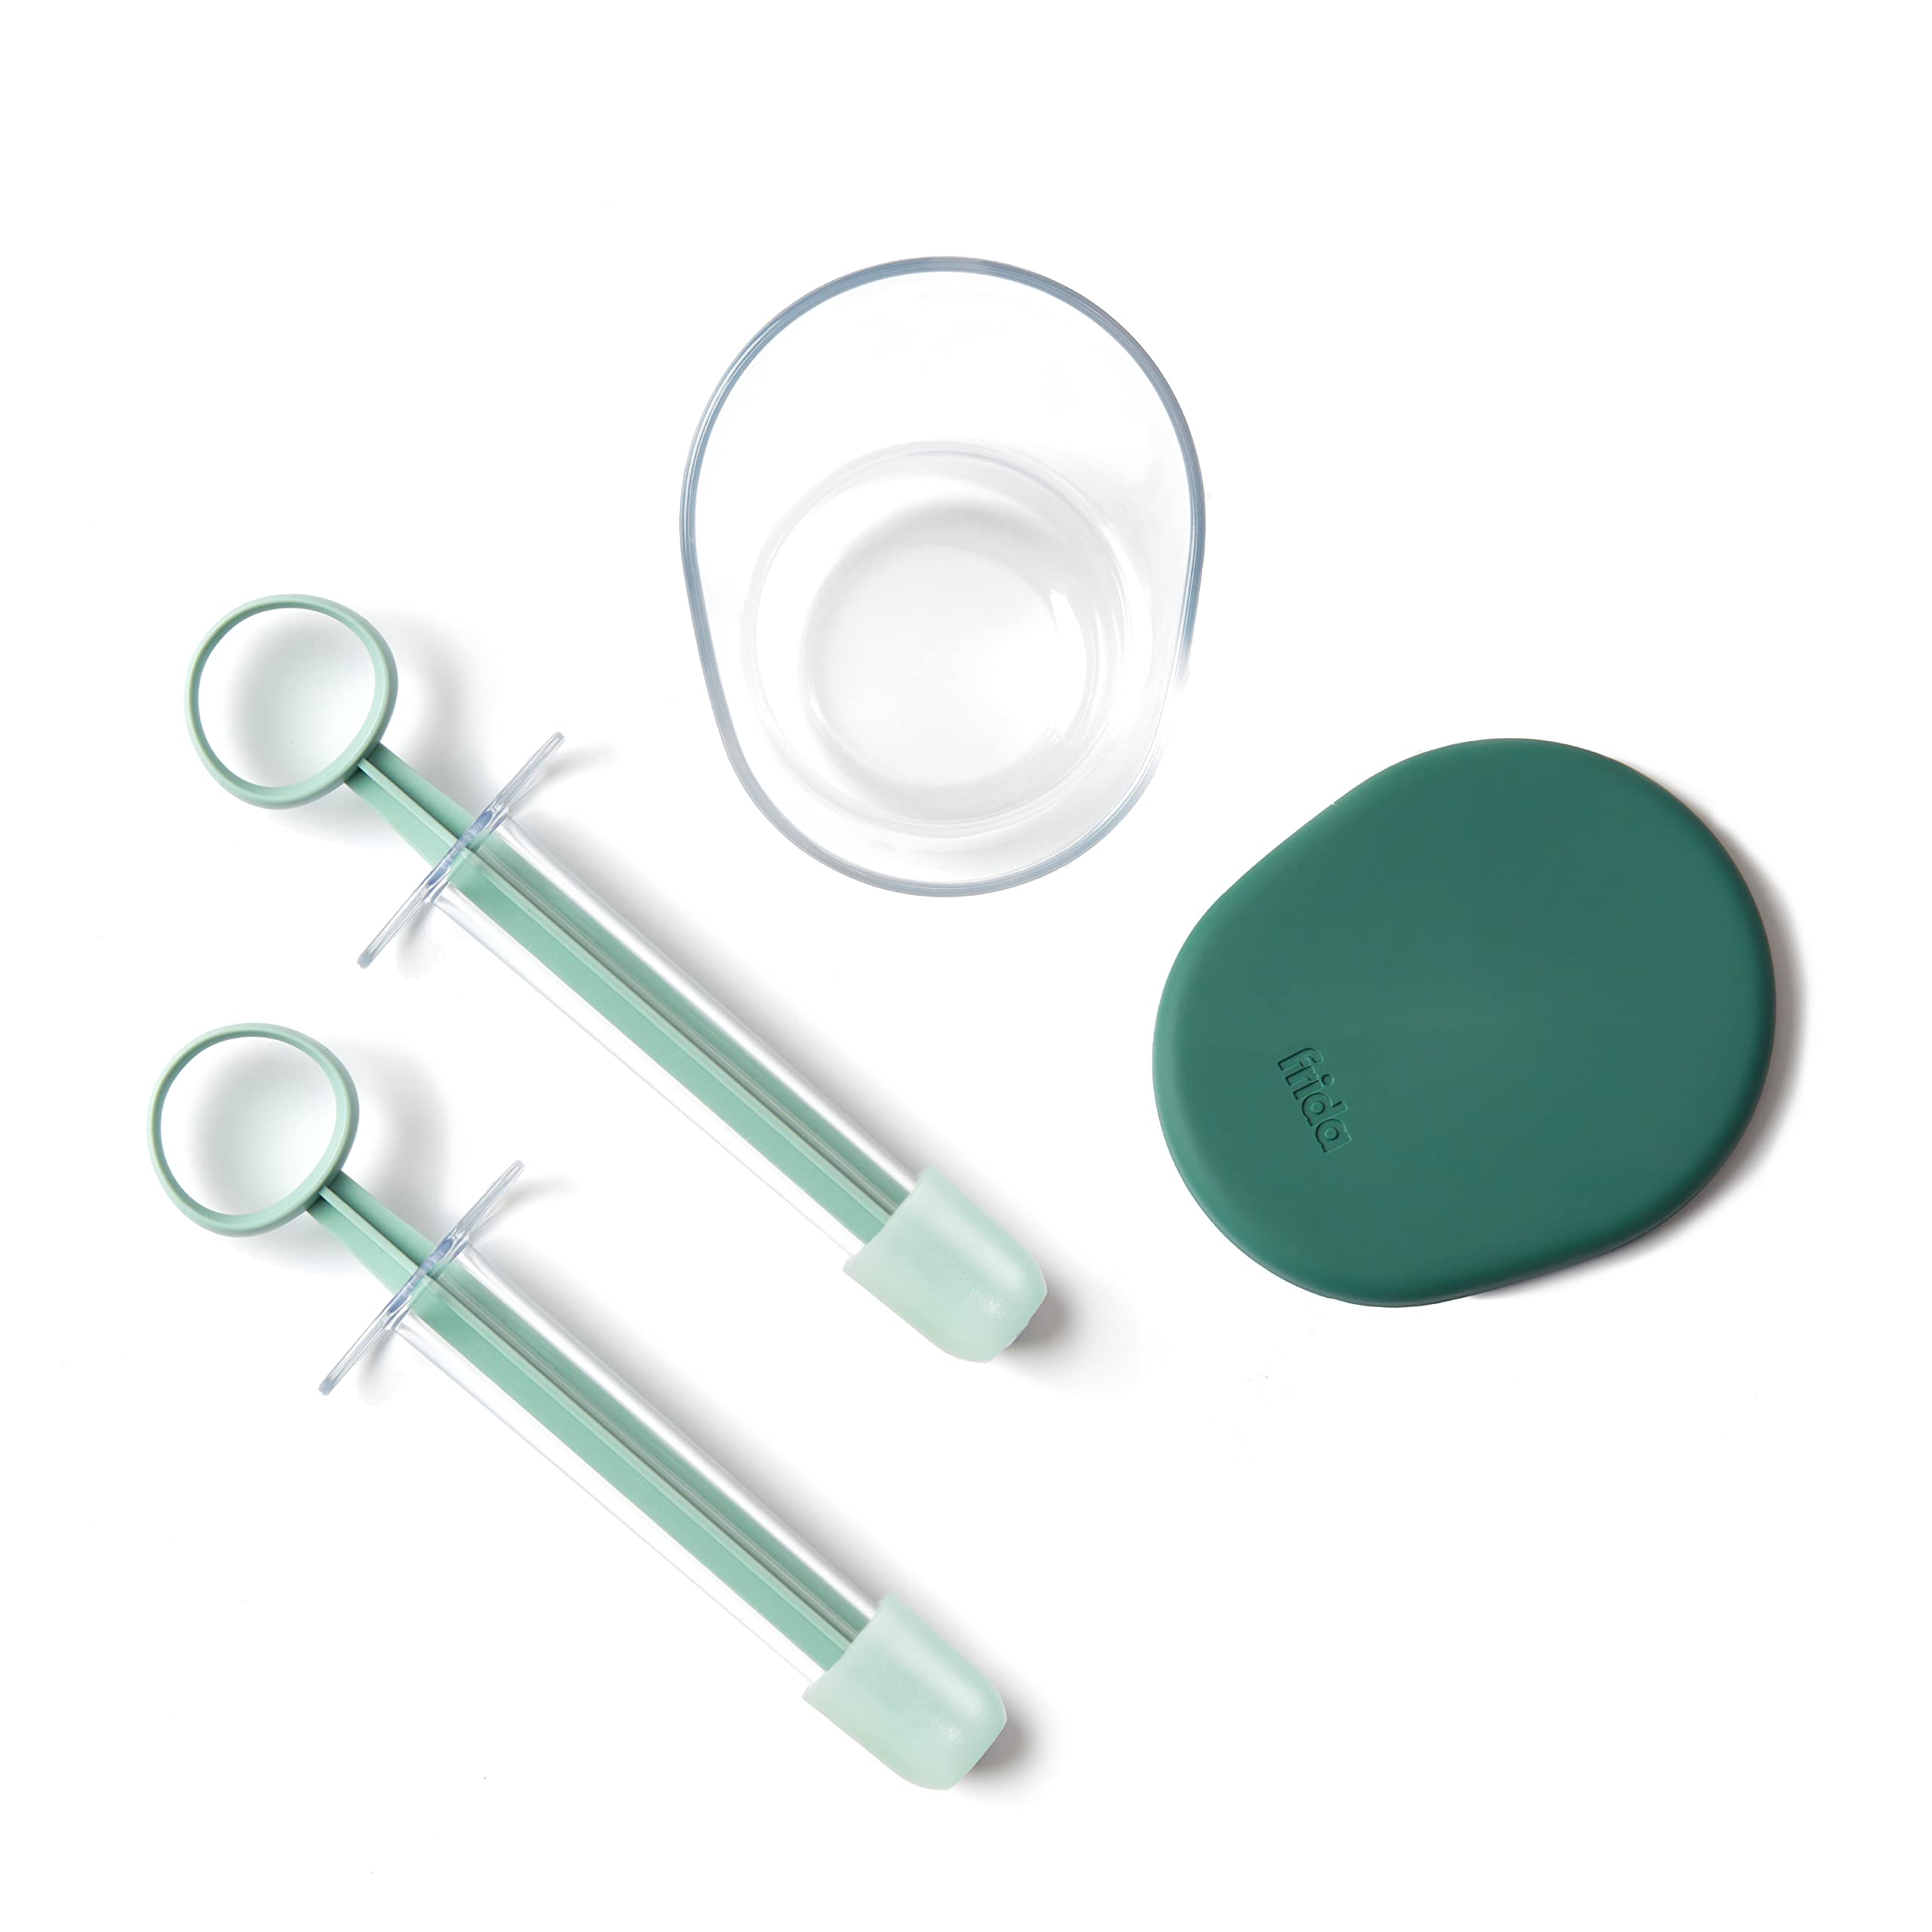 Frida Fertility at-Home Insemination Set - Collection + Insertion System, Developed with Fertility Specialists, Thoughtfully Designed for Comfort + Minimal Waste - 2 Applicators + 1 Collection Cup